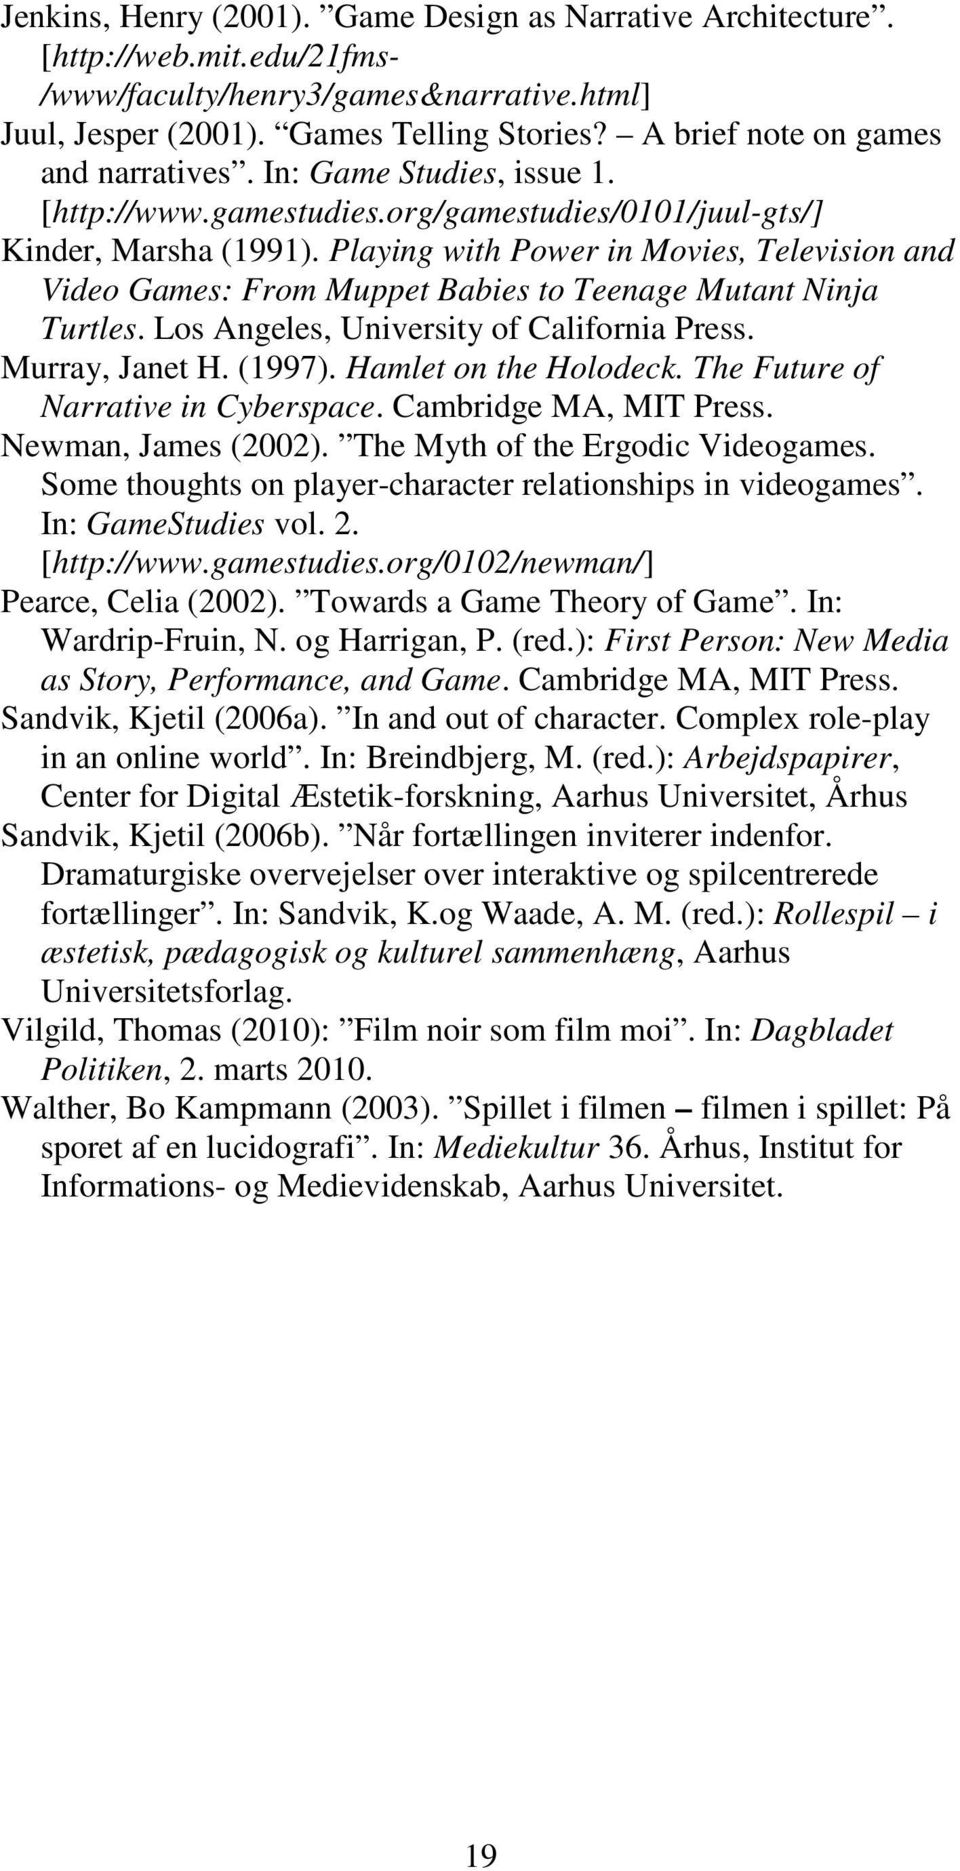 Playing with Power in Movies, Television and Video Games: From Muppet Babies to Teenage Mutant Ninja Turtles. Los Angeles, University of California Press. Murray, Janet H. (1997).